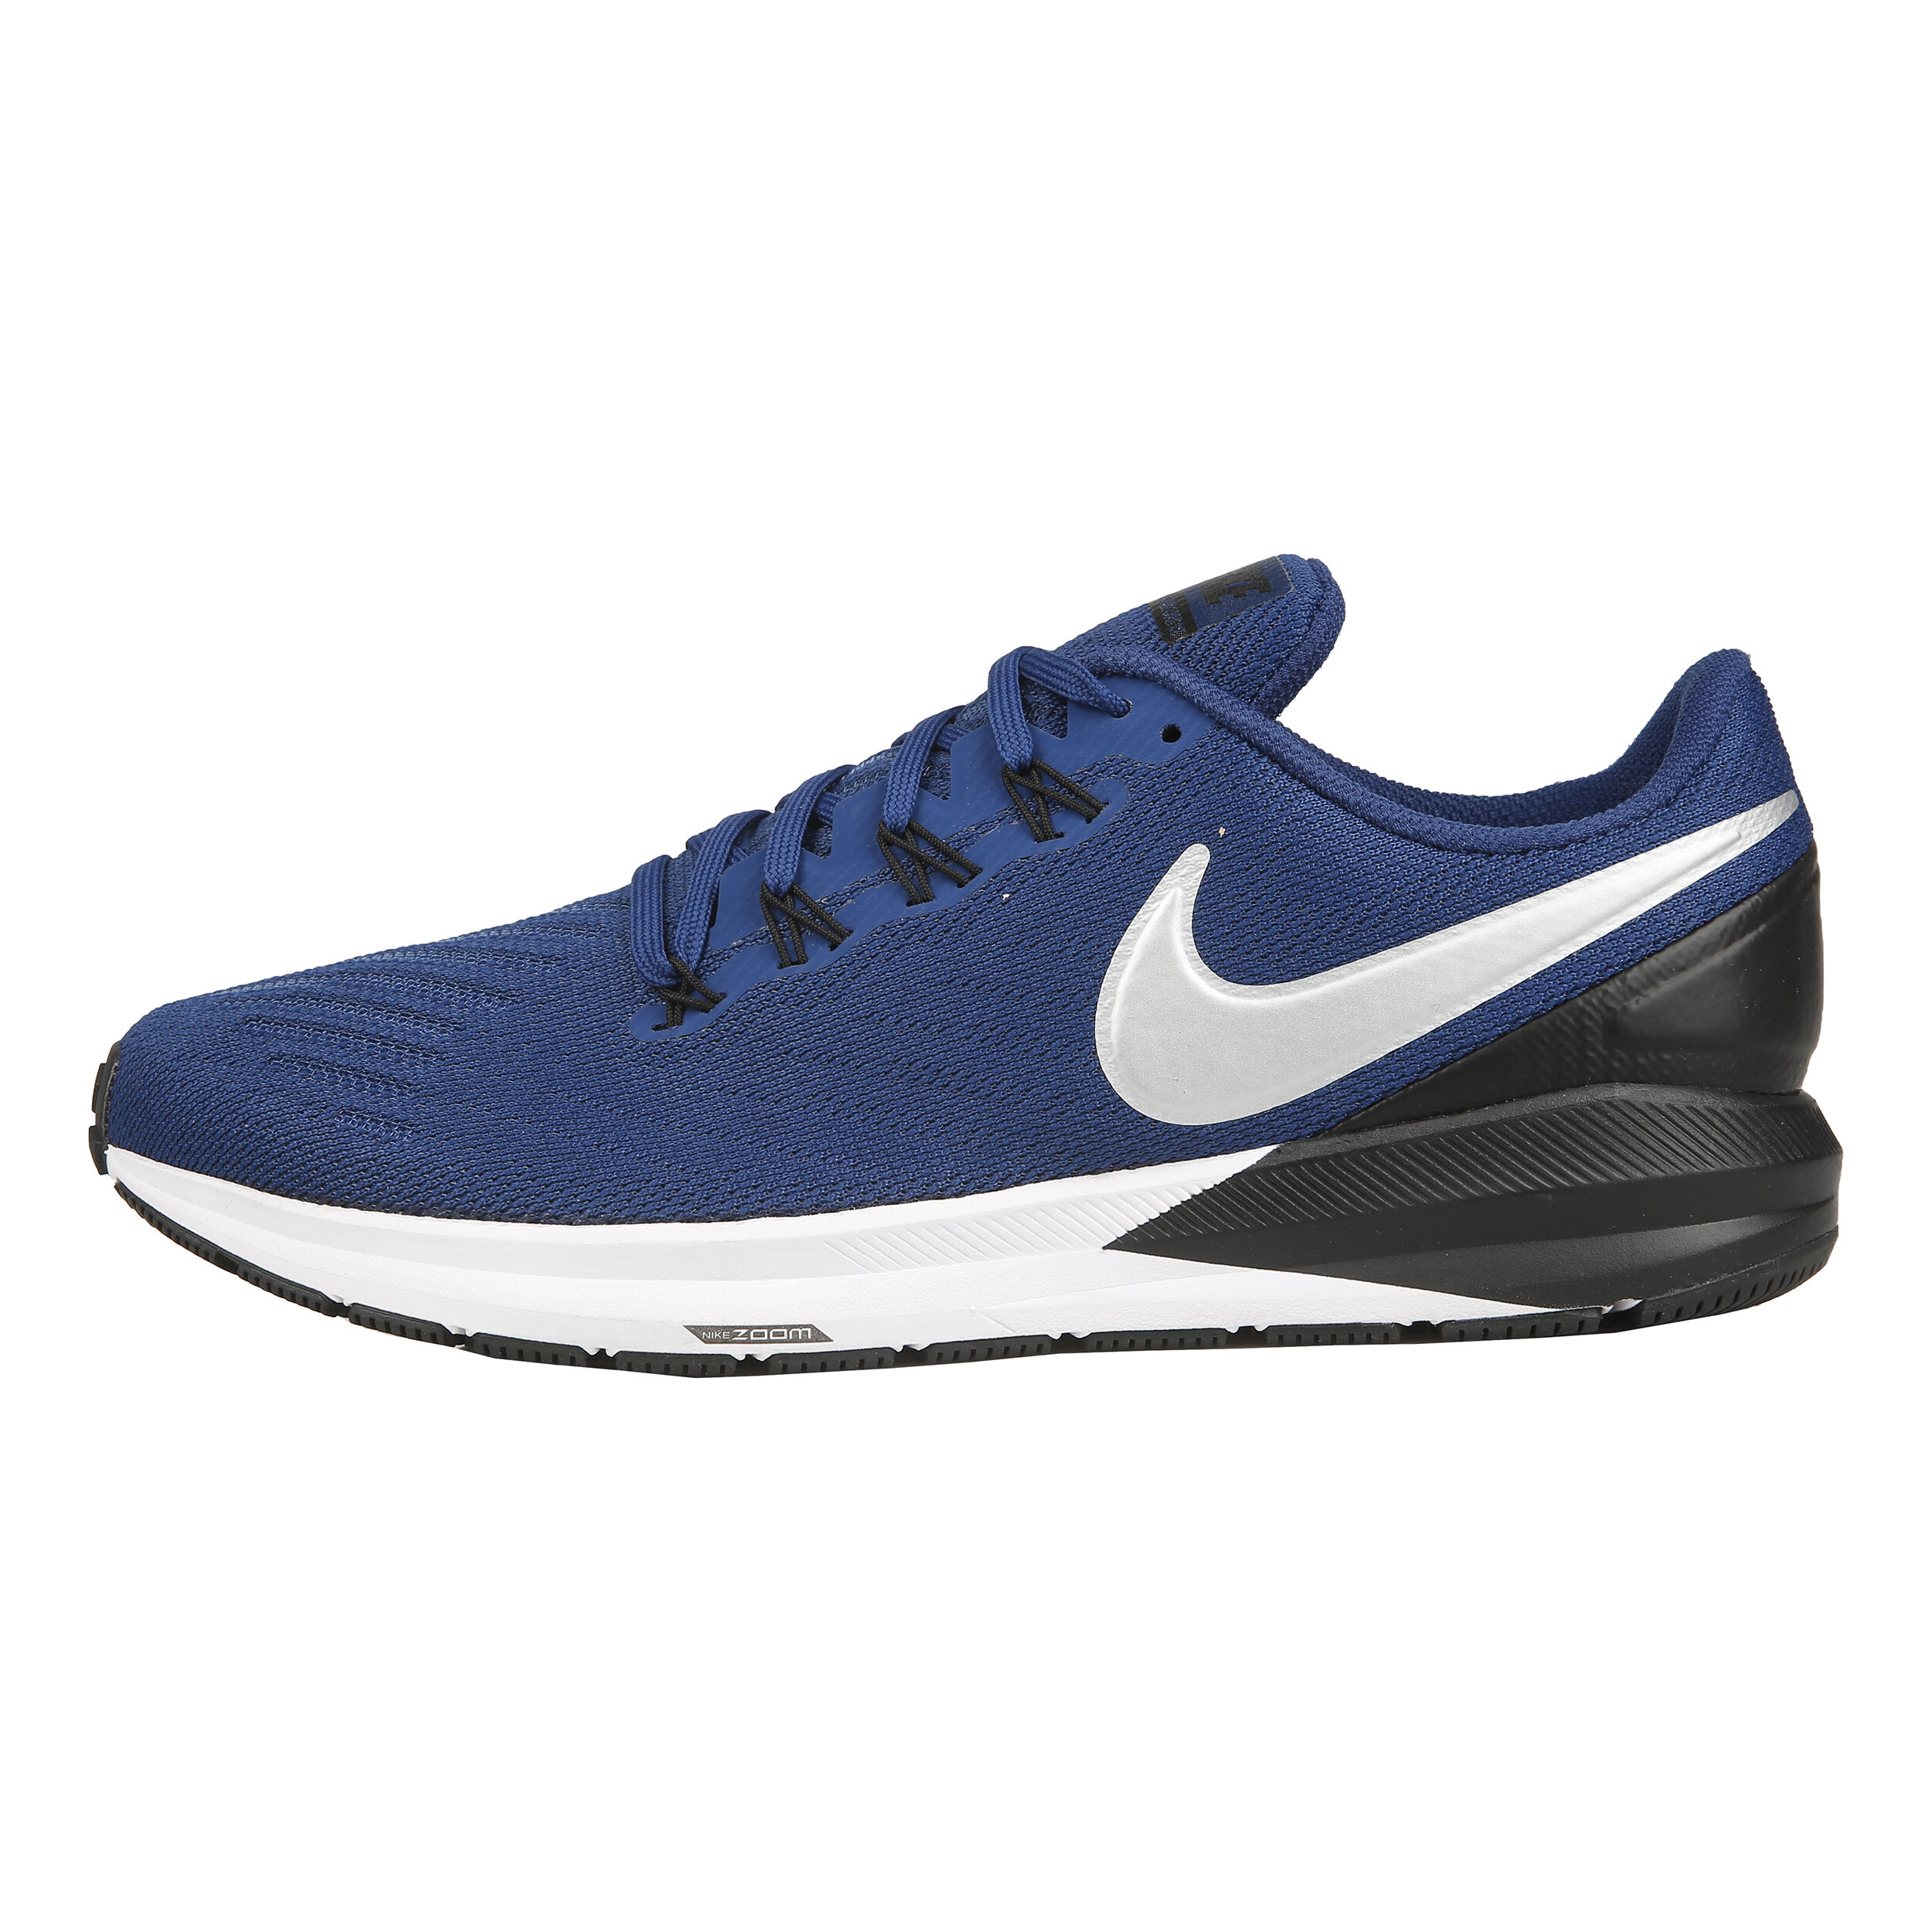 nike men's stability running shoes